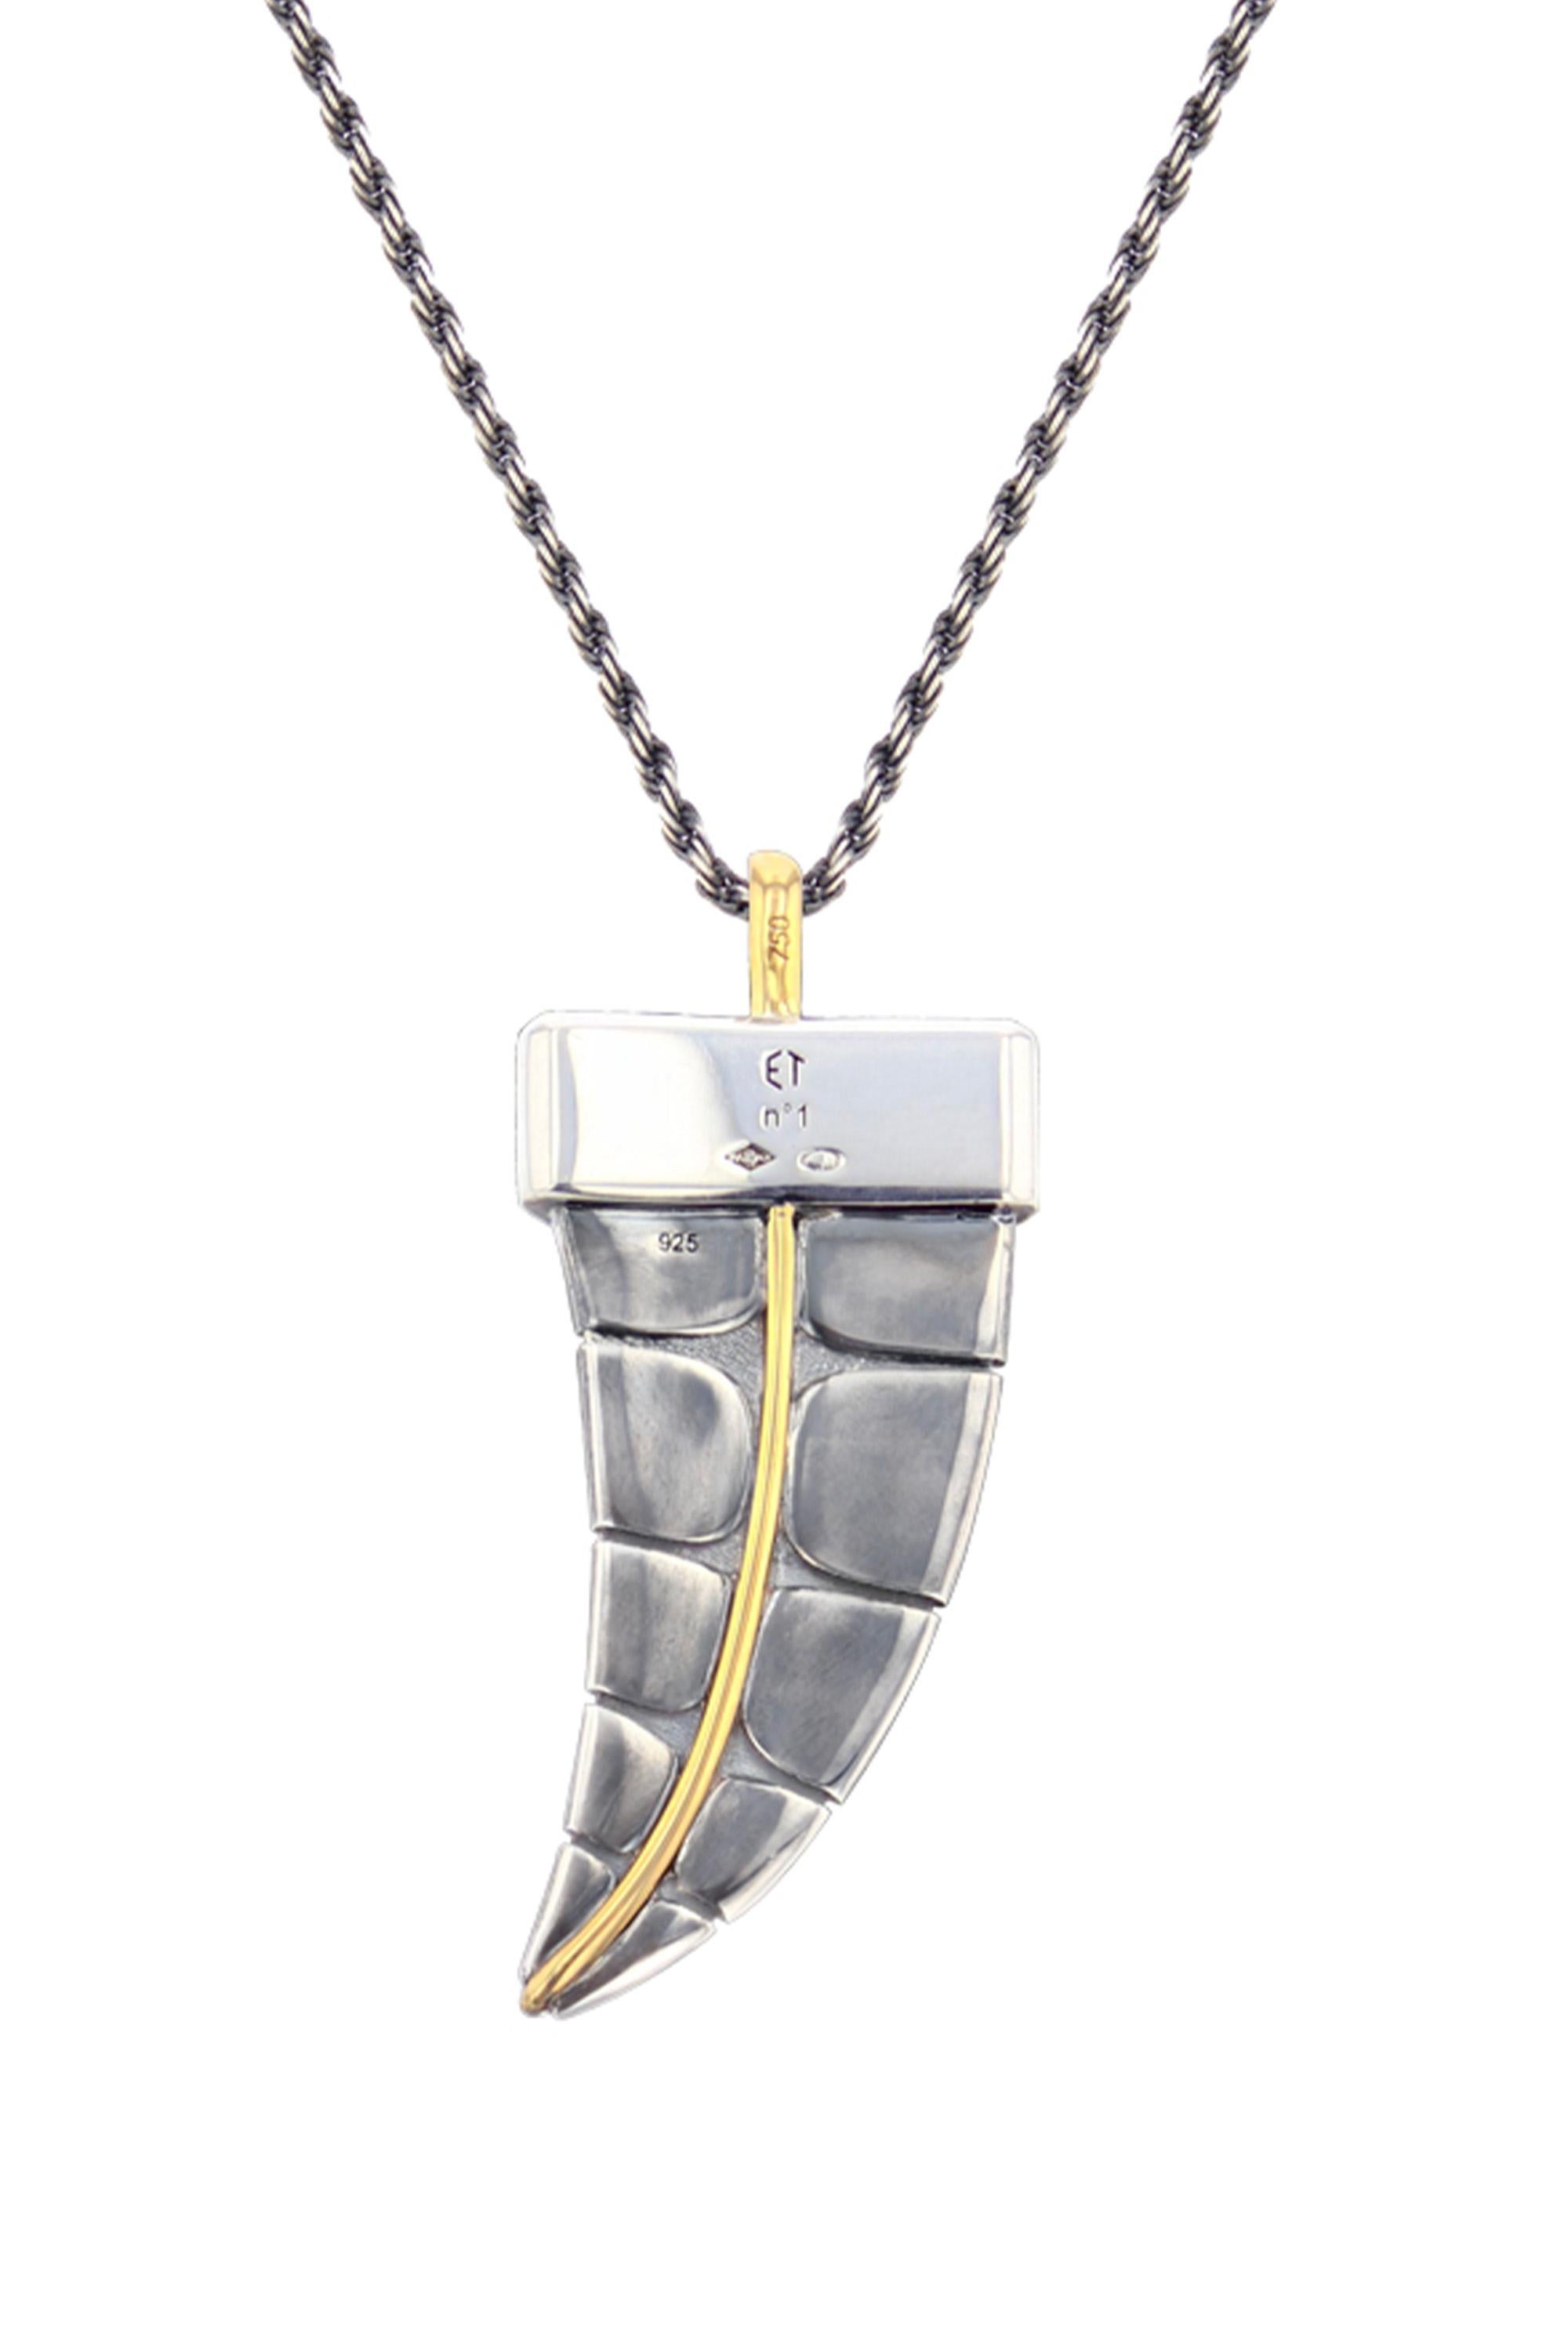 Yellow gold and distressed silver pendant. Distressed silver scales and yellow gold wire.

Details:
18k Yellow Gold: 1.4 g
Distressed Silver: 14 g
Made in France